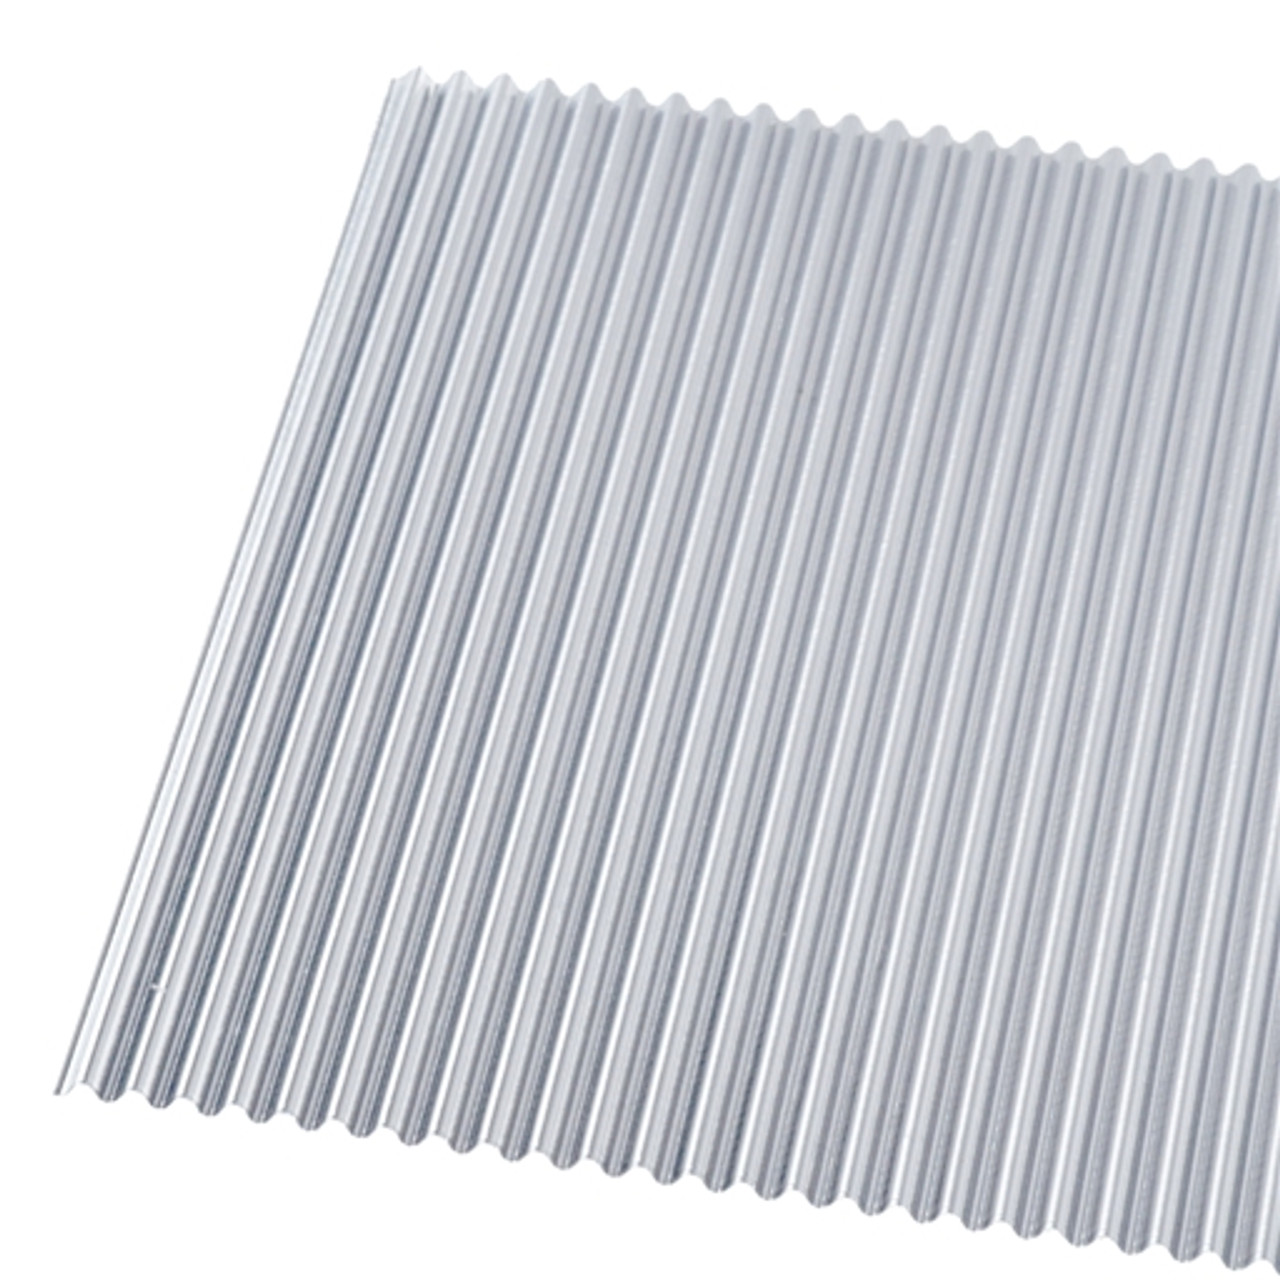 Five Small Corrugated Metal Sheets